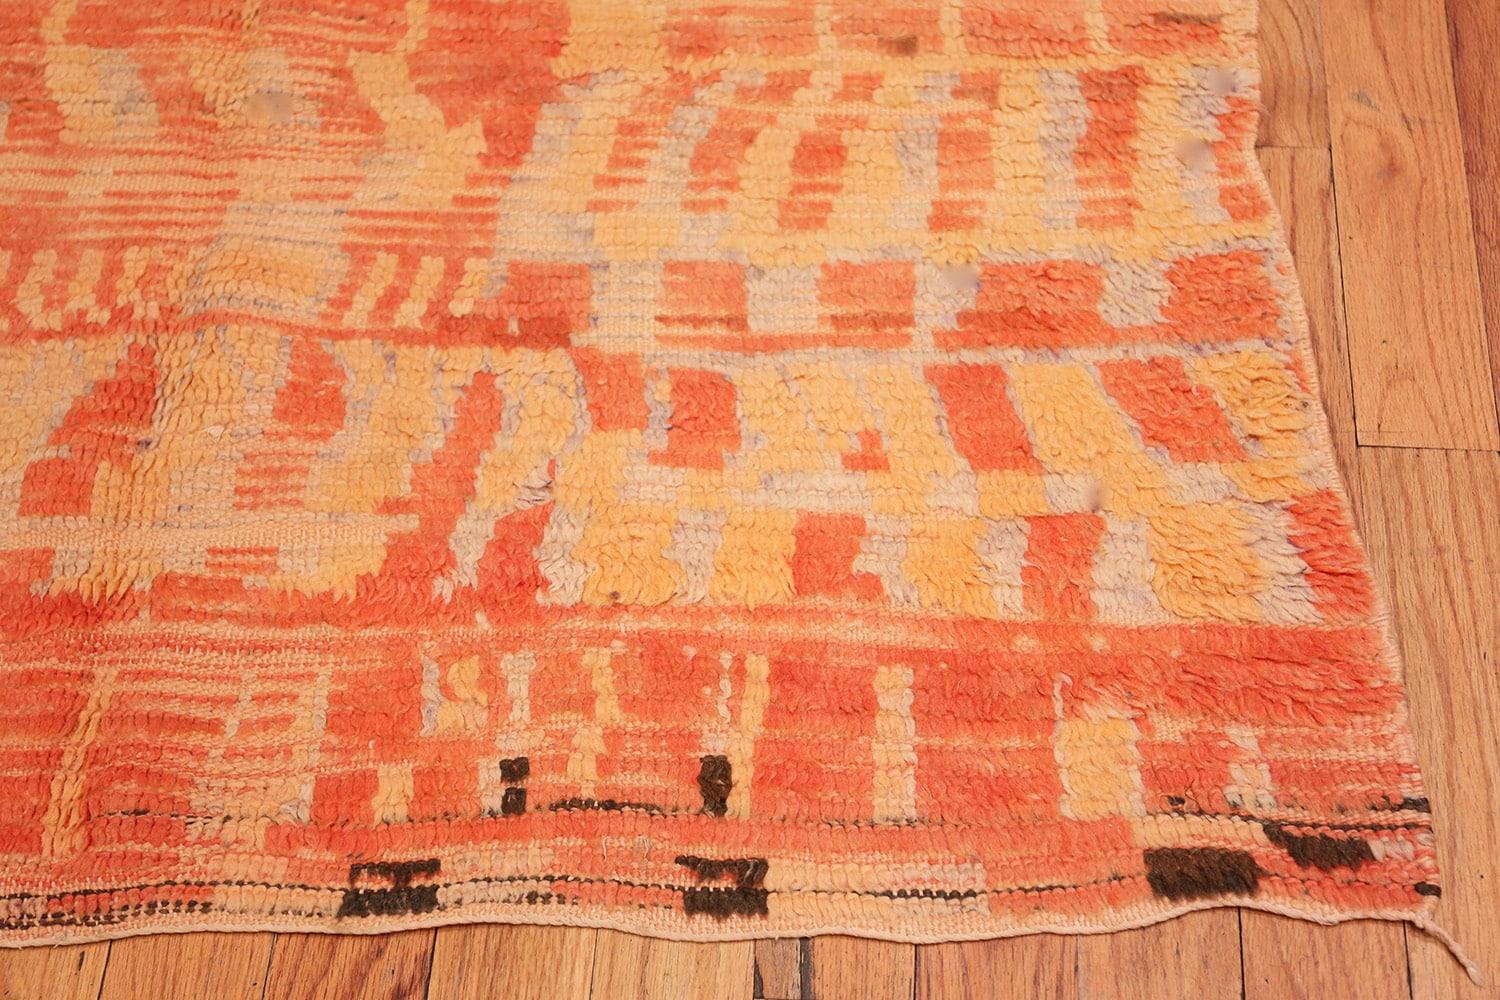 Small Beautiful Burnt Orange Color Shaggy Vintage Moroccan Berber Rug, Country of Origin / Rug Type: Moroccan Rugs, Circa Date: 3rd Quarter Of The 20th Century. Size: 4 ft 6 in x 6 ft 6 in (1.37 m x 1.98 m)

